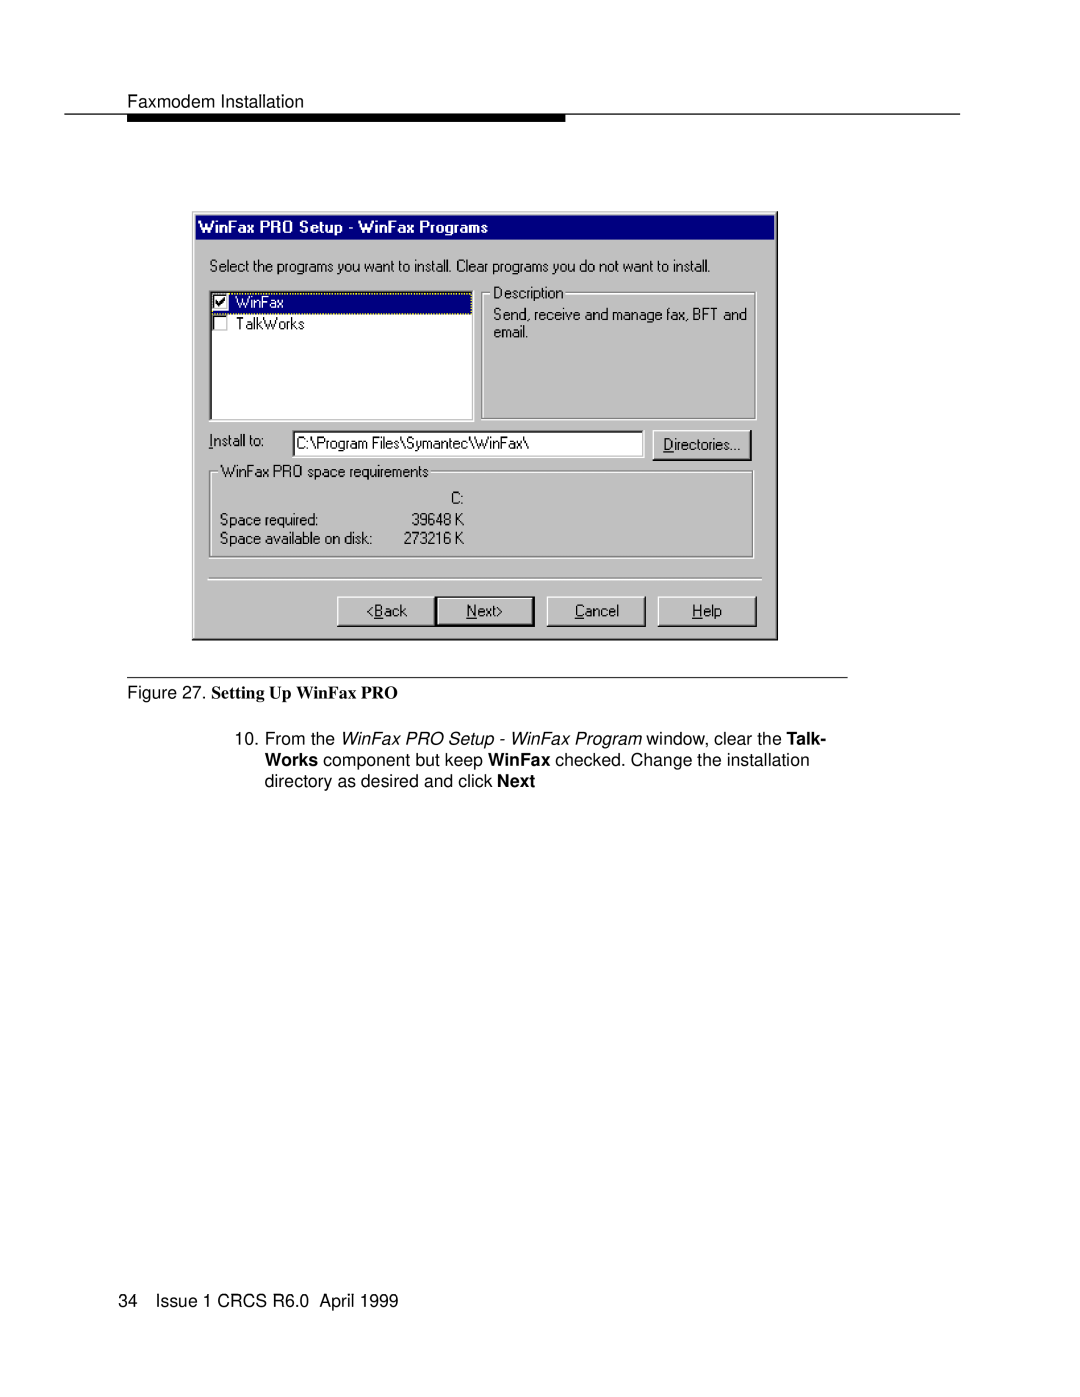 Lucent Technologies manual Faxmodem Installation, Setting Up WinFax PRO, Issue 1 CRCS R6.0 April 